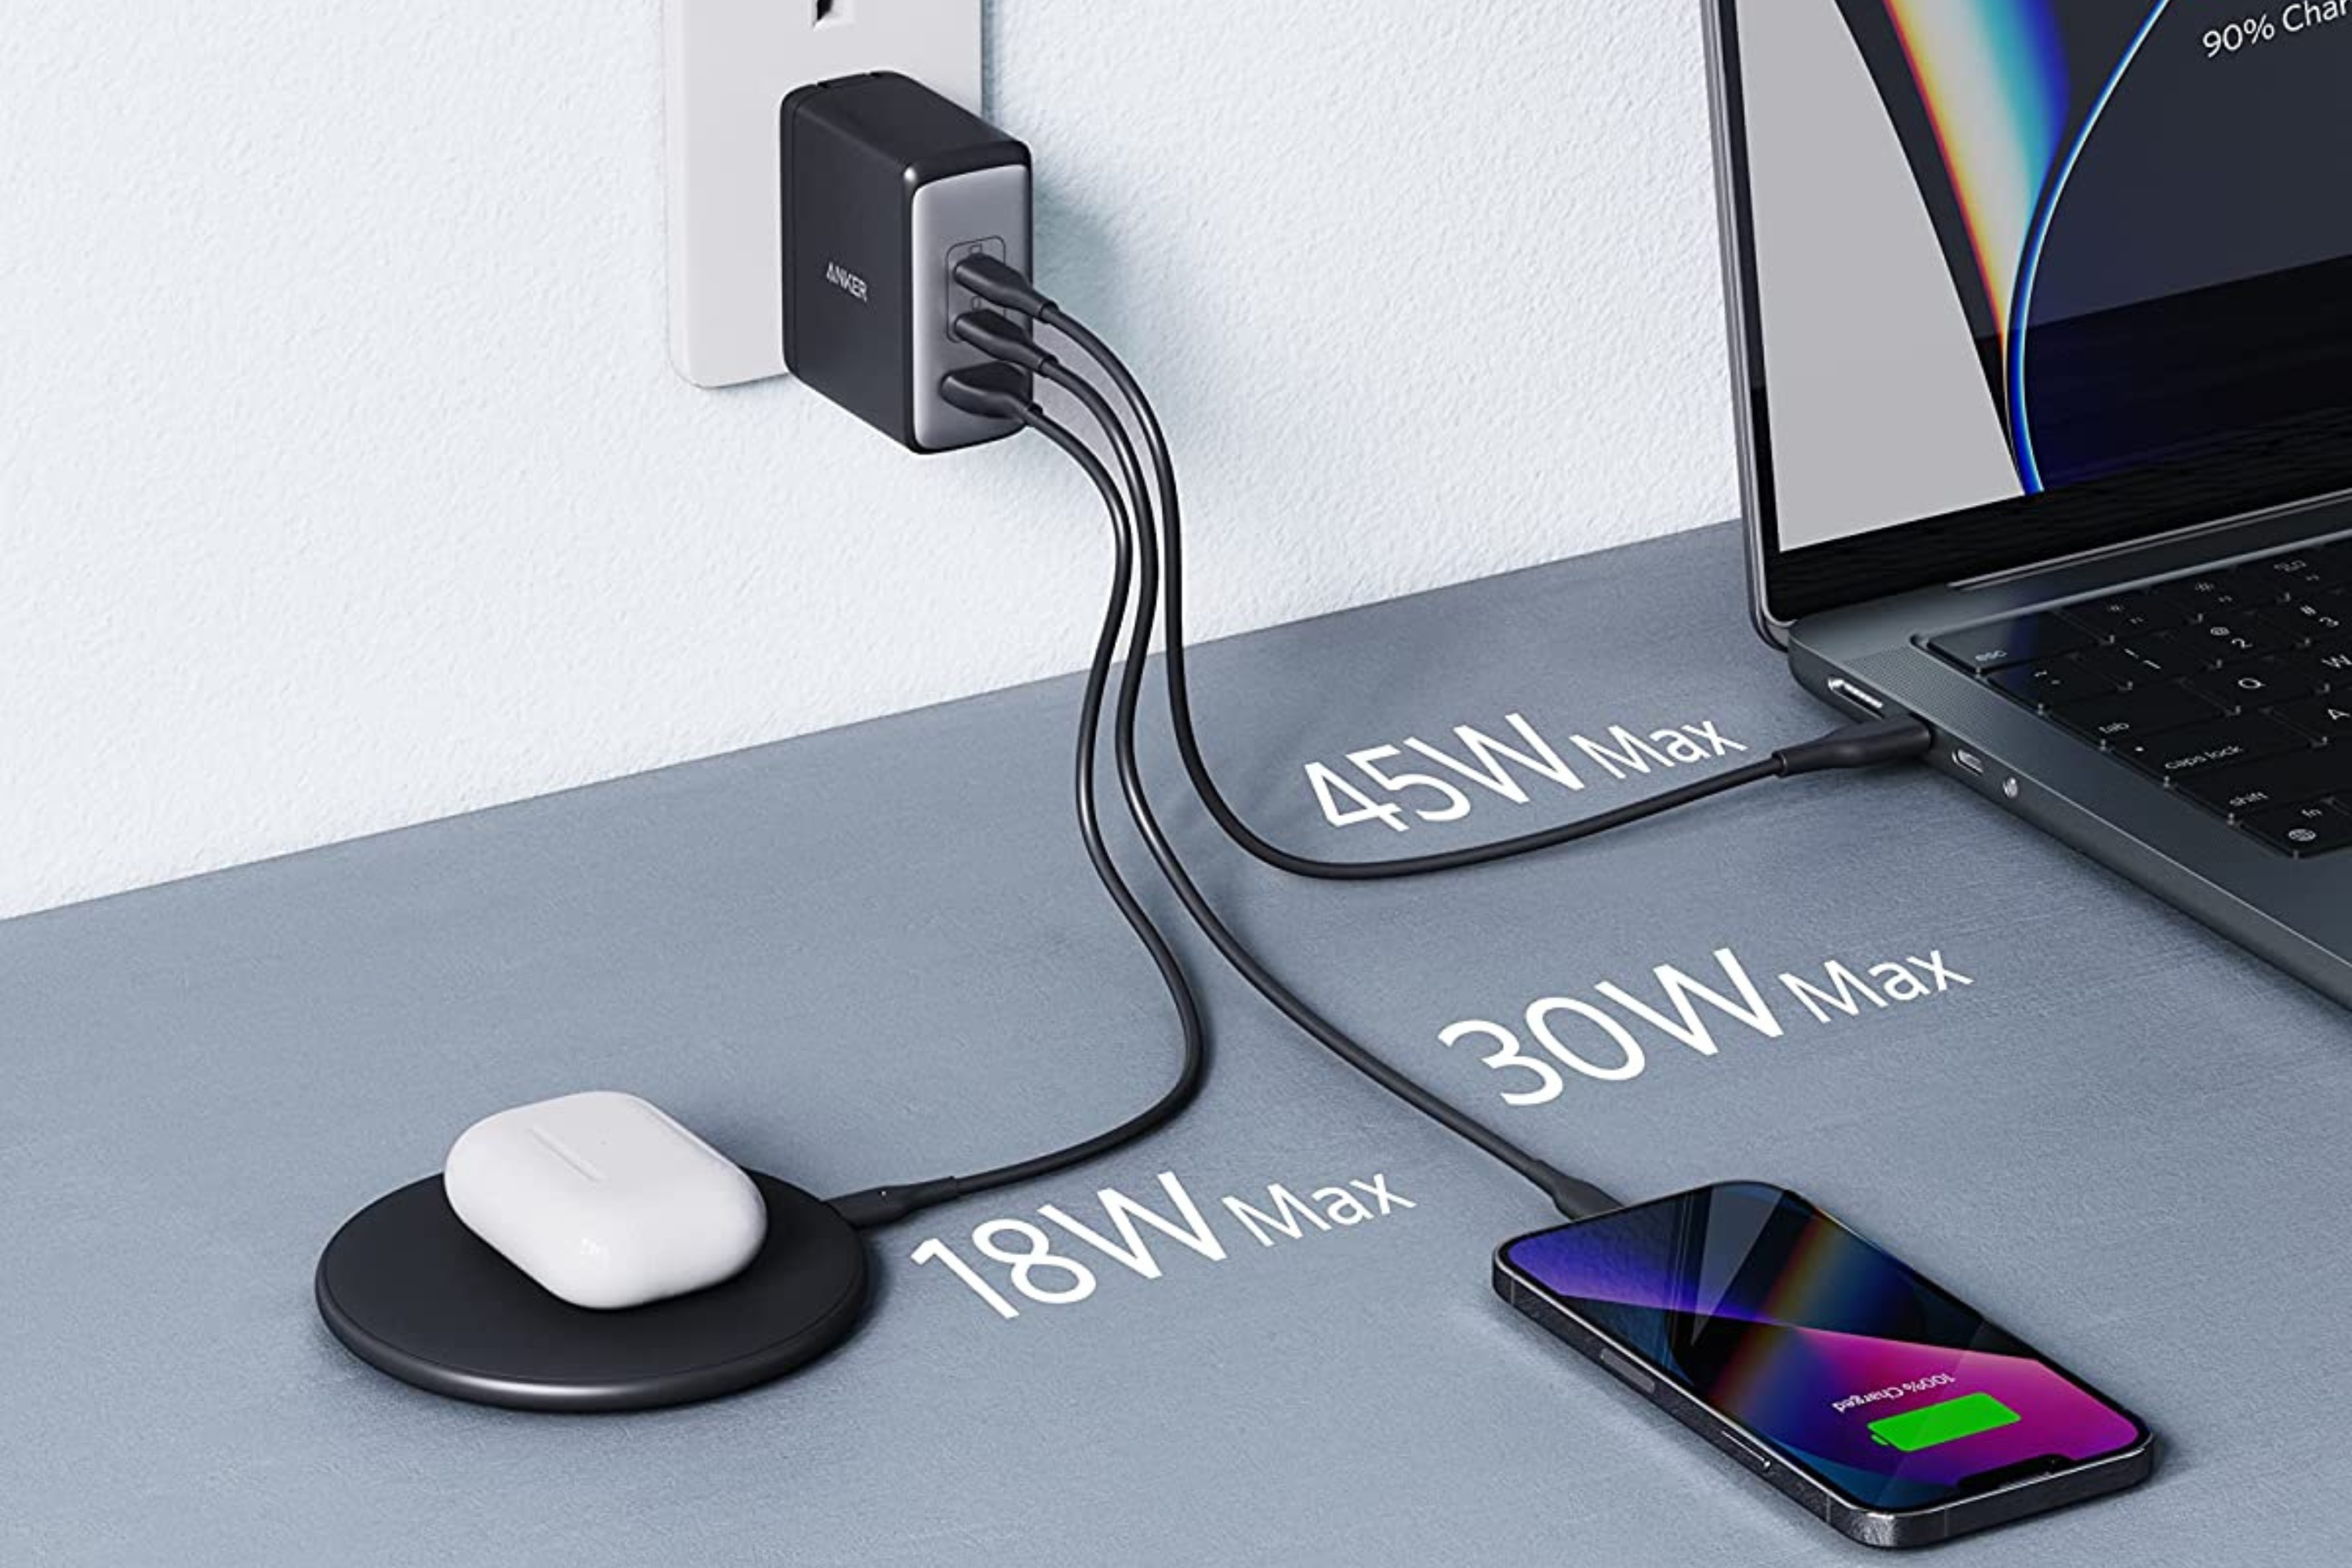 Anker USB C Charger with airpos, iphone, and macbook plugged in